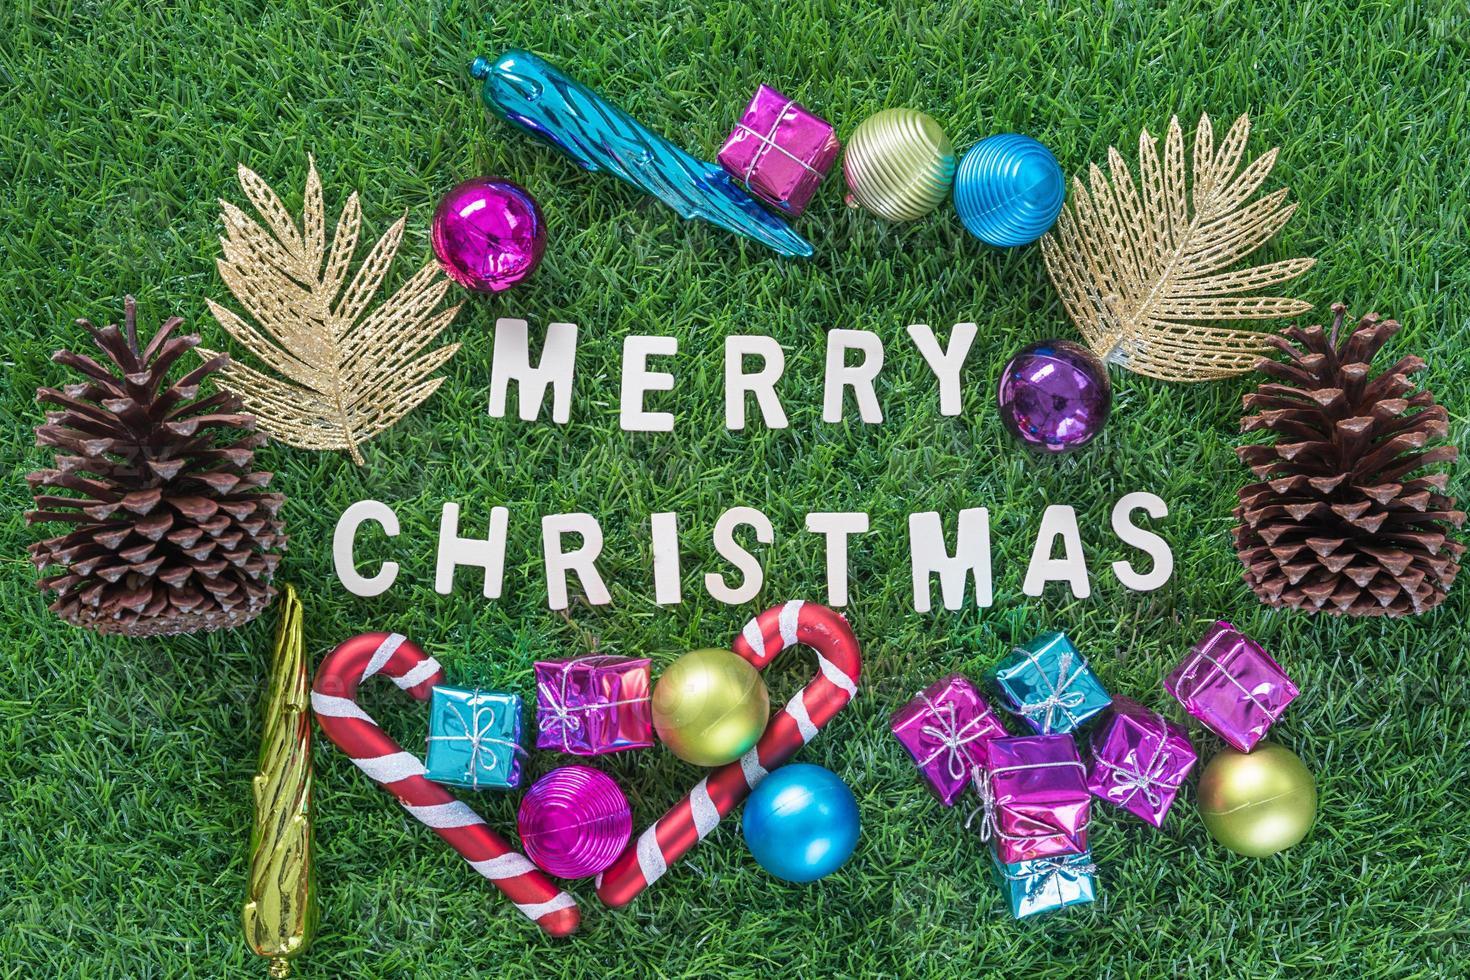 Christmas alphabet and decoration on green grass photo